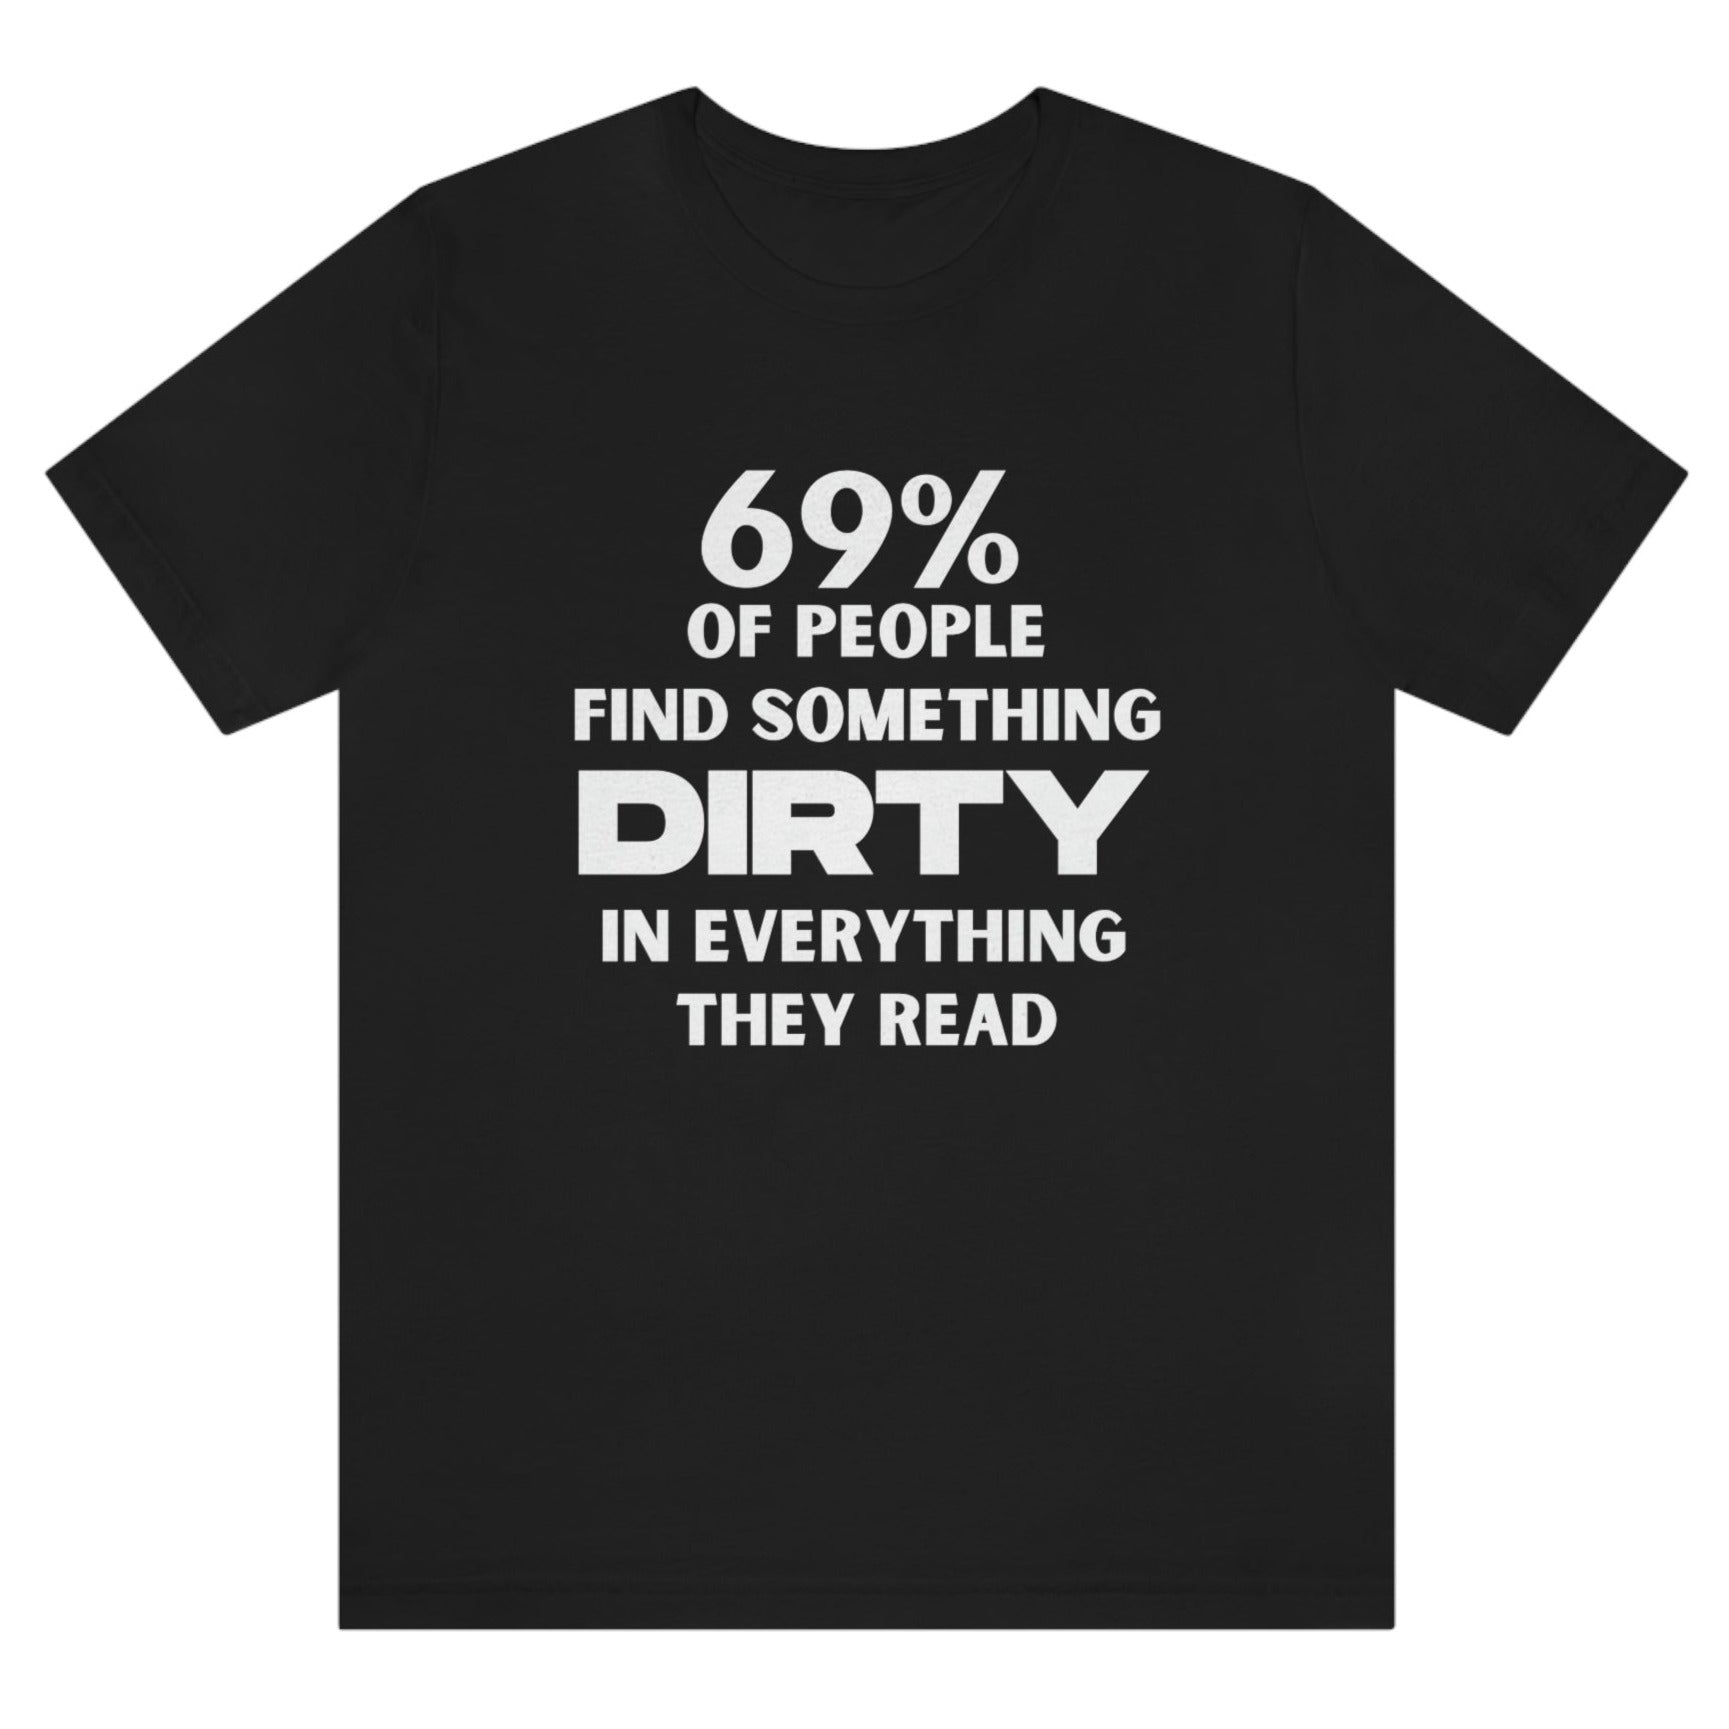 69-percent-of-people-find-something-dirty-in-everything-they-read-black-t-shirt-unisex-funny